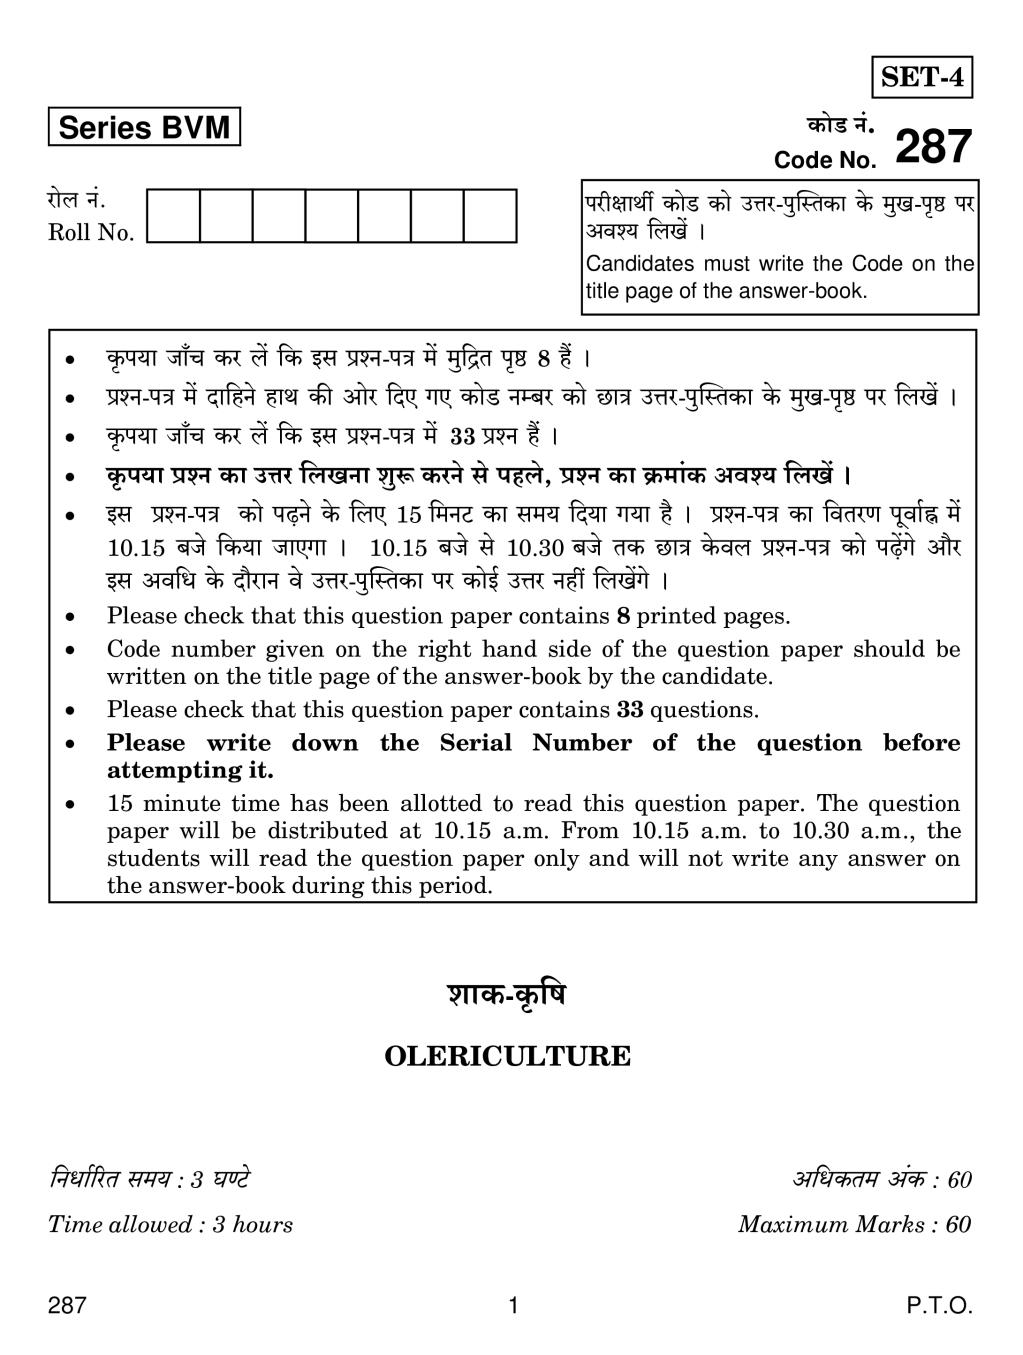 CBSE Class 12 Olericulture Question Paper 2019 - Page 1